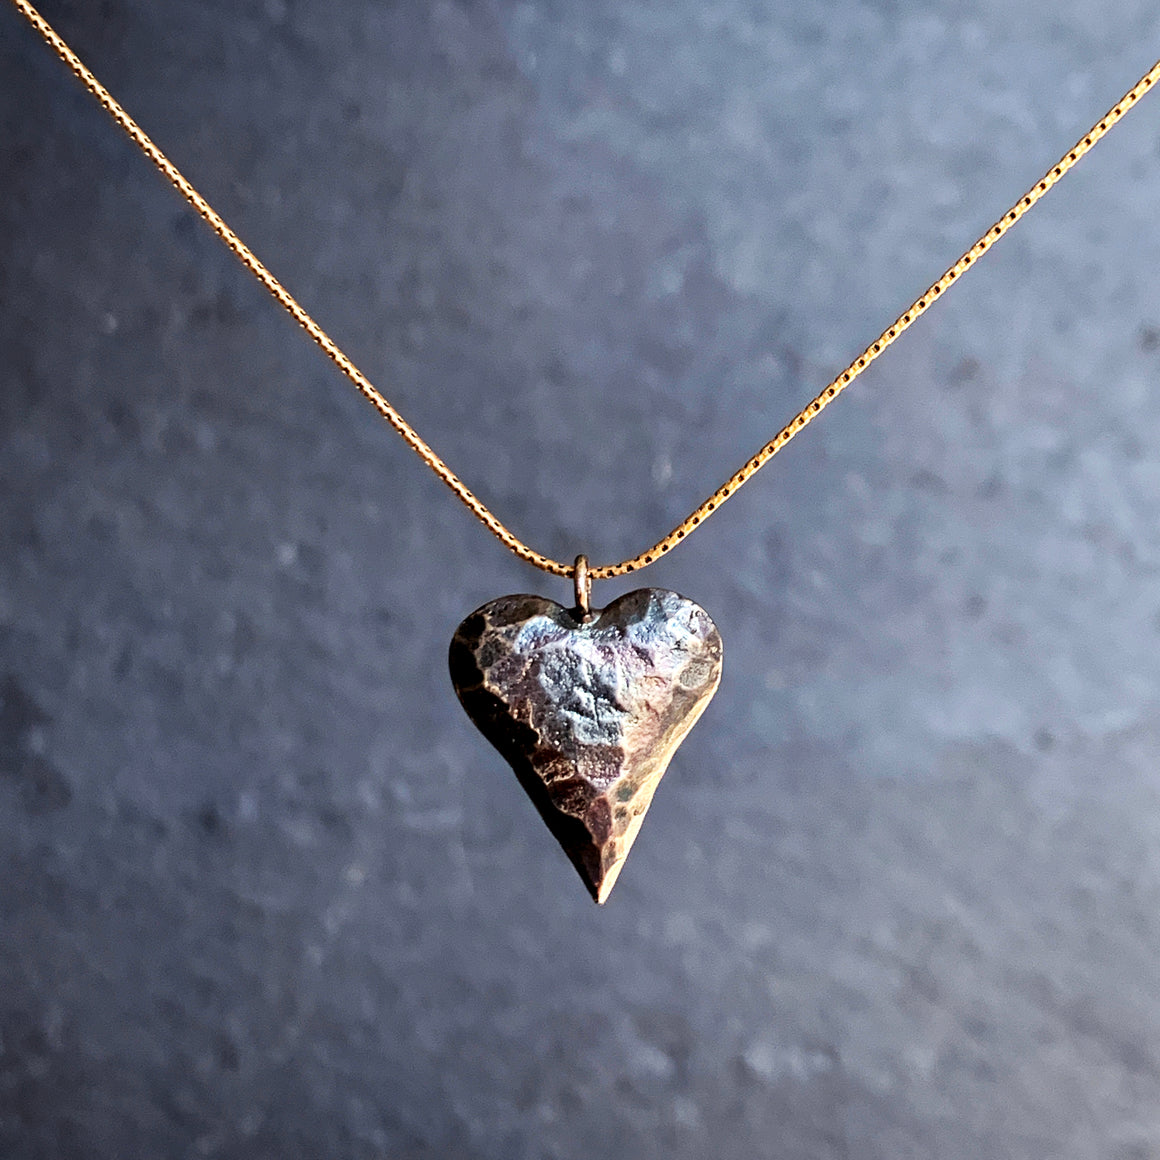 Oxidised Beaten Pewter Heart on Silver Chain Necklace